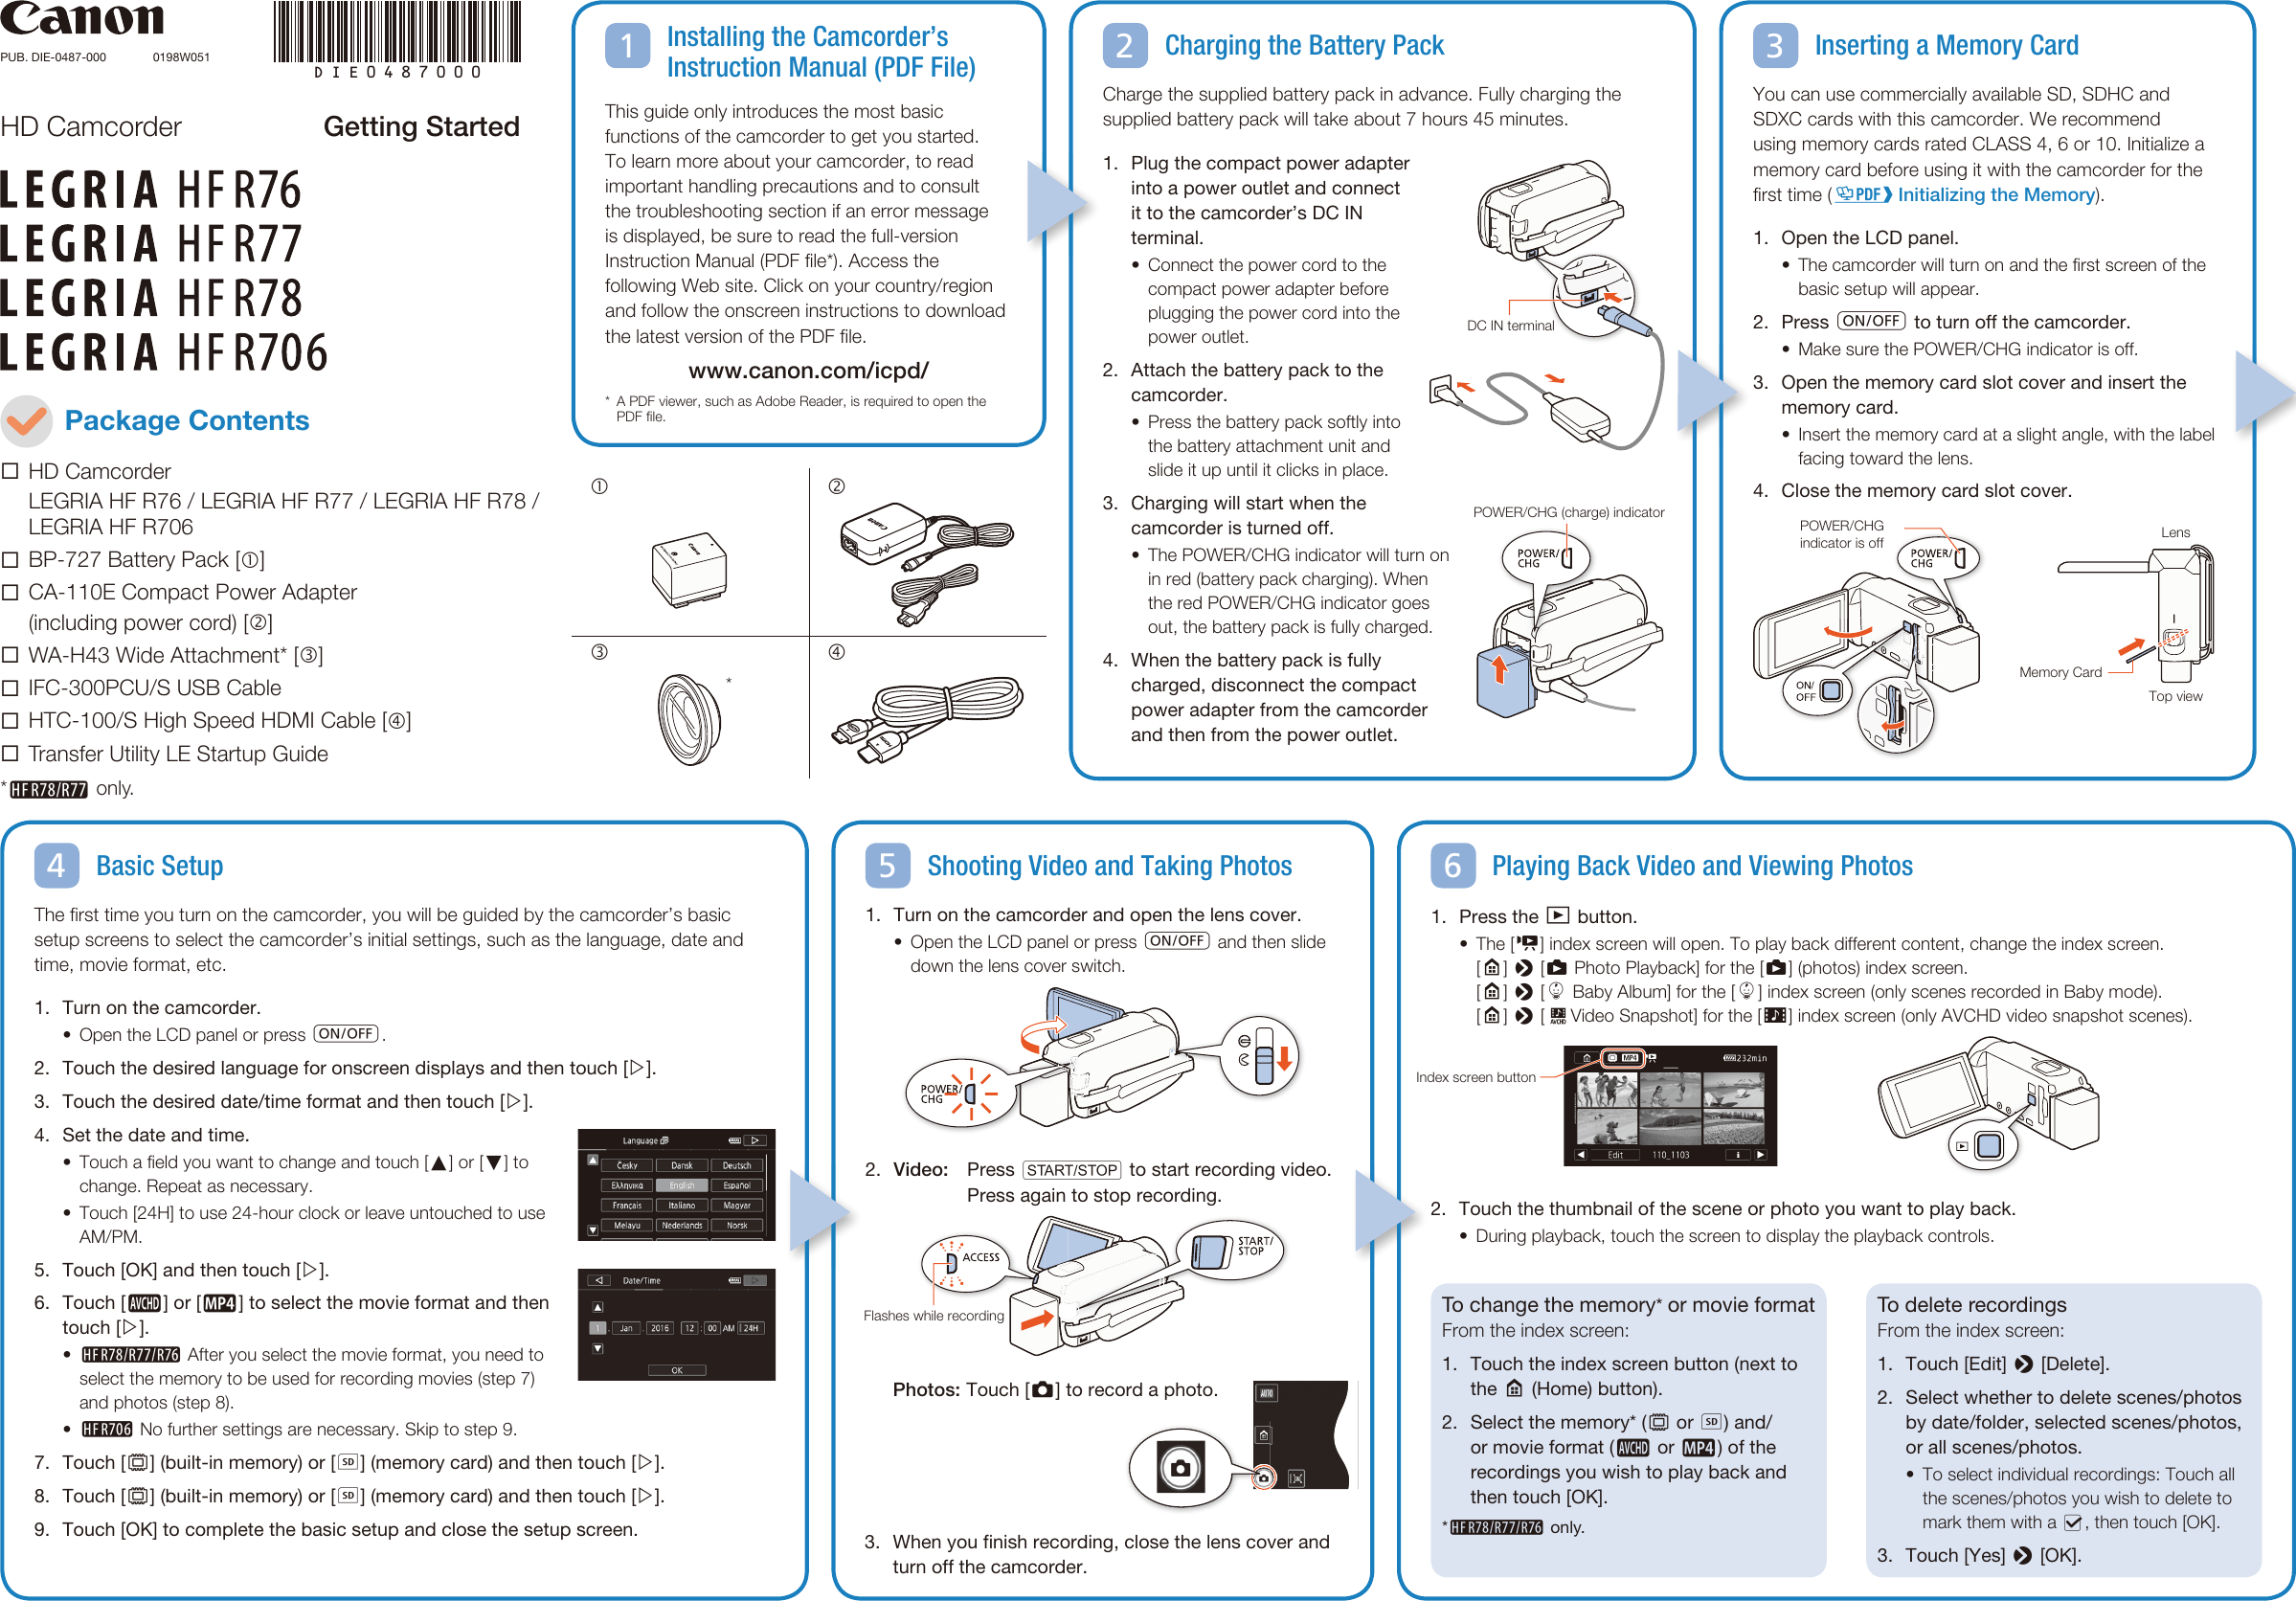 Page 1 of 2 - Canon  LEGRIA HF R77 - Quick Guide Hfr76-77-78-706-gs-en